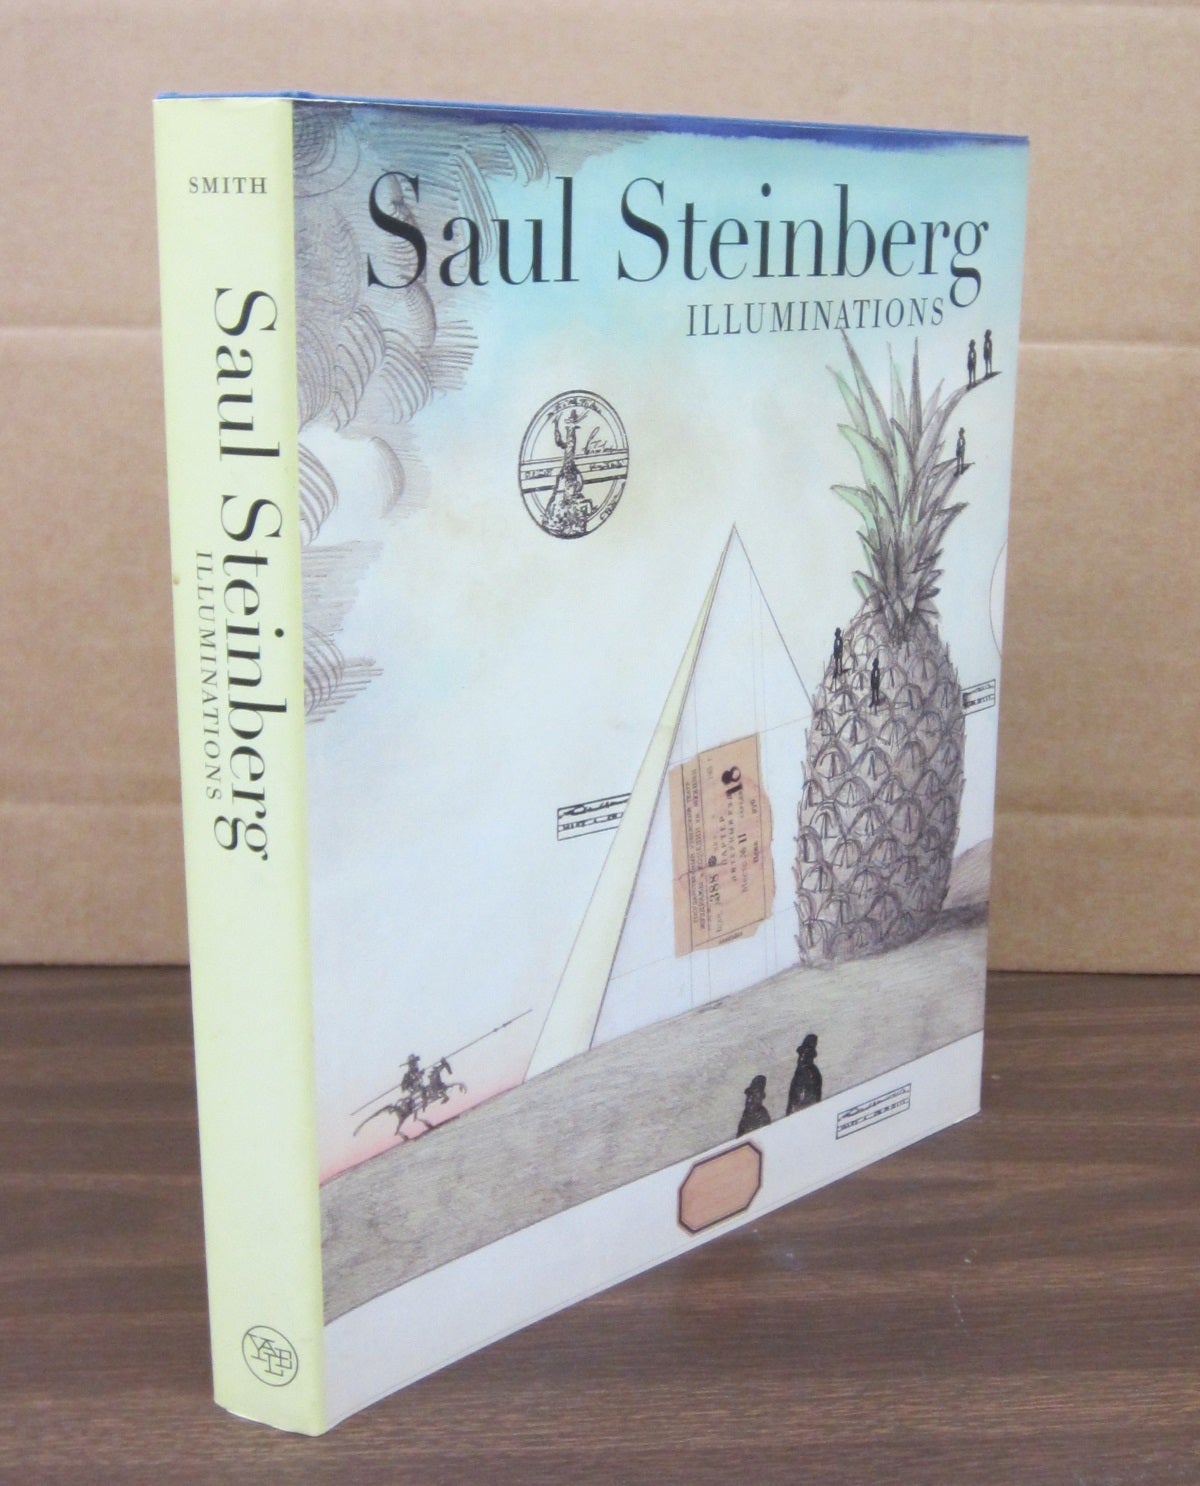 Saul Steinberg: Illuminations by Joel Smith, an, Charles Simic on Midway  Book Store